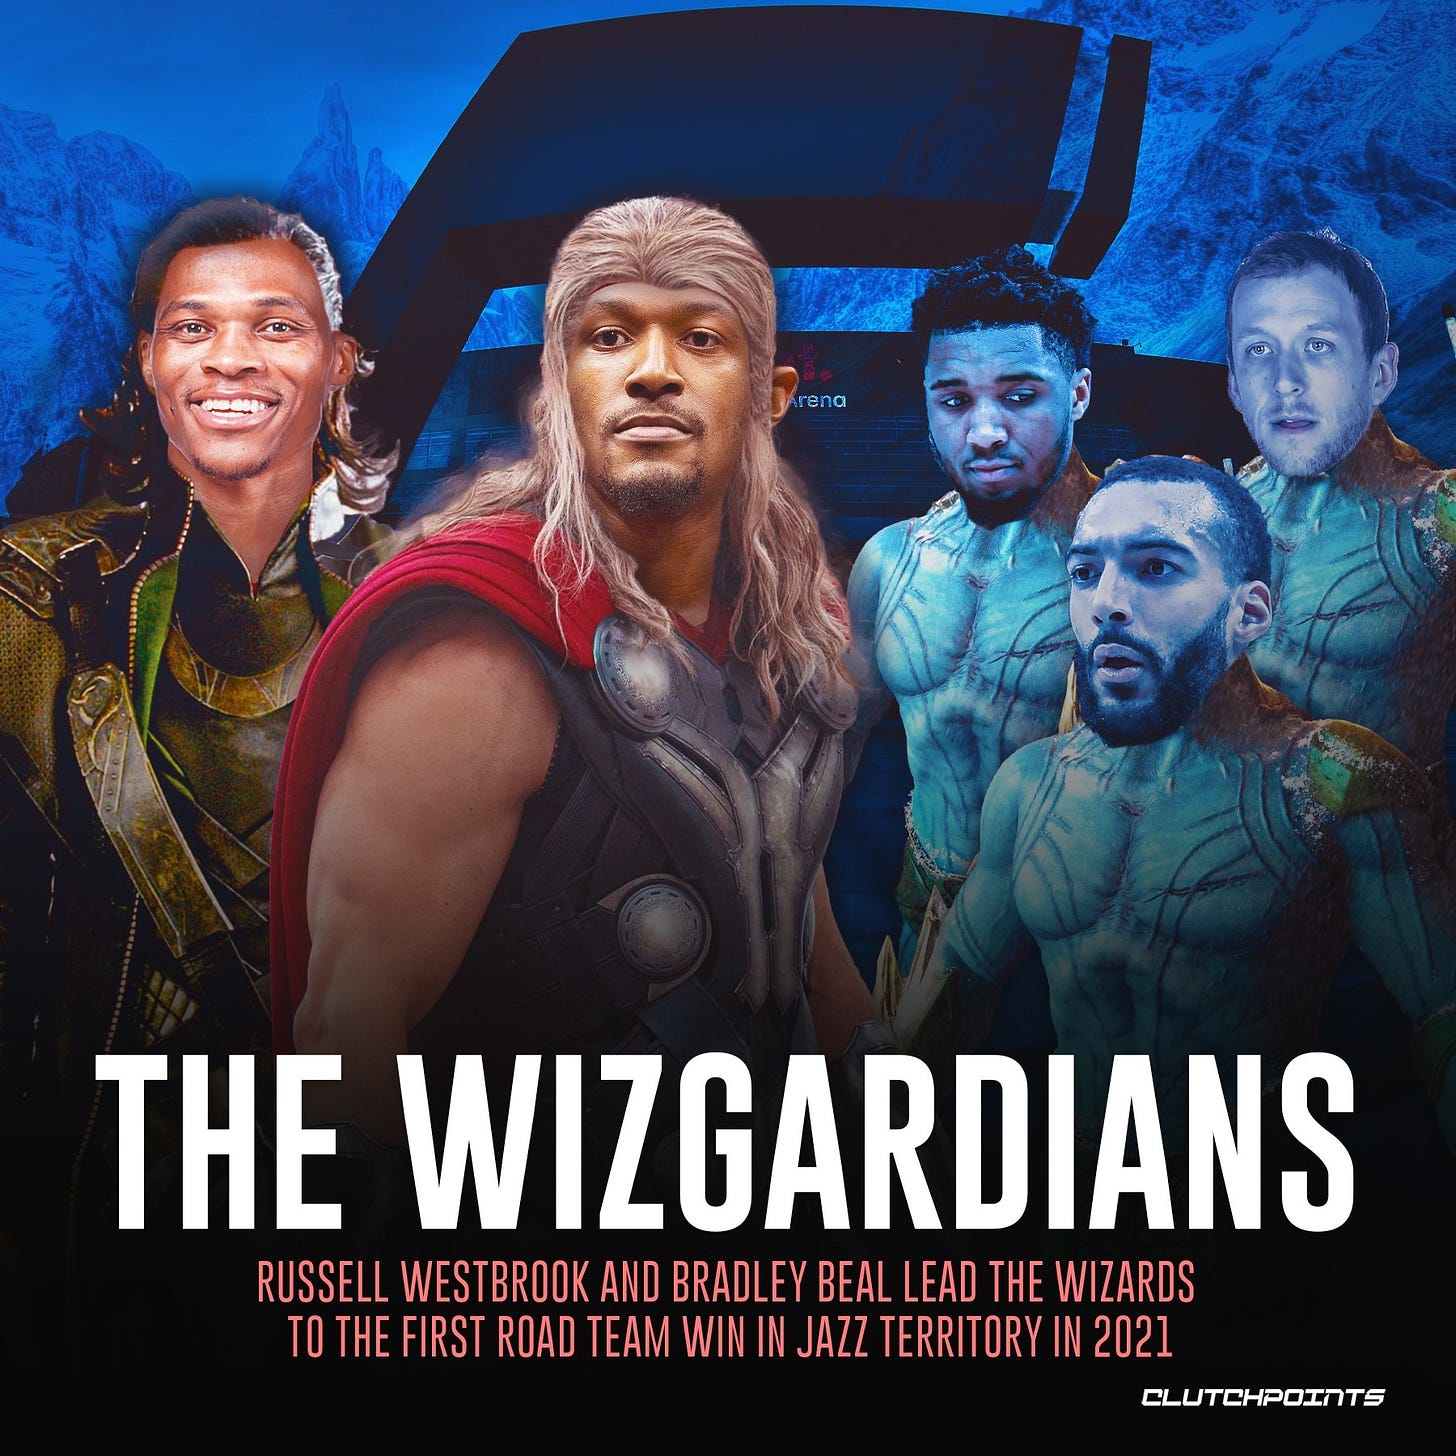 May be an image of 5 people and text that says 'Arena na THE WIZGARDIANS RUSSELL WESTBROOK AND BRADLEY BEAL LEAD THE WIZARDS TIRS ROAD TEAM WIN IN JAZZ TERRITORY IN 2021 CLUTCHPOINTS'